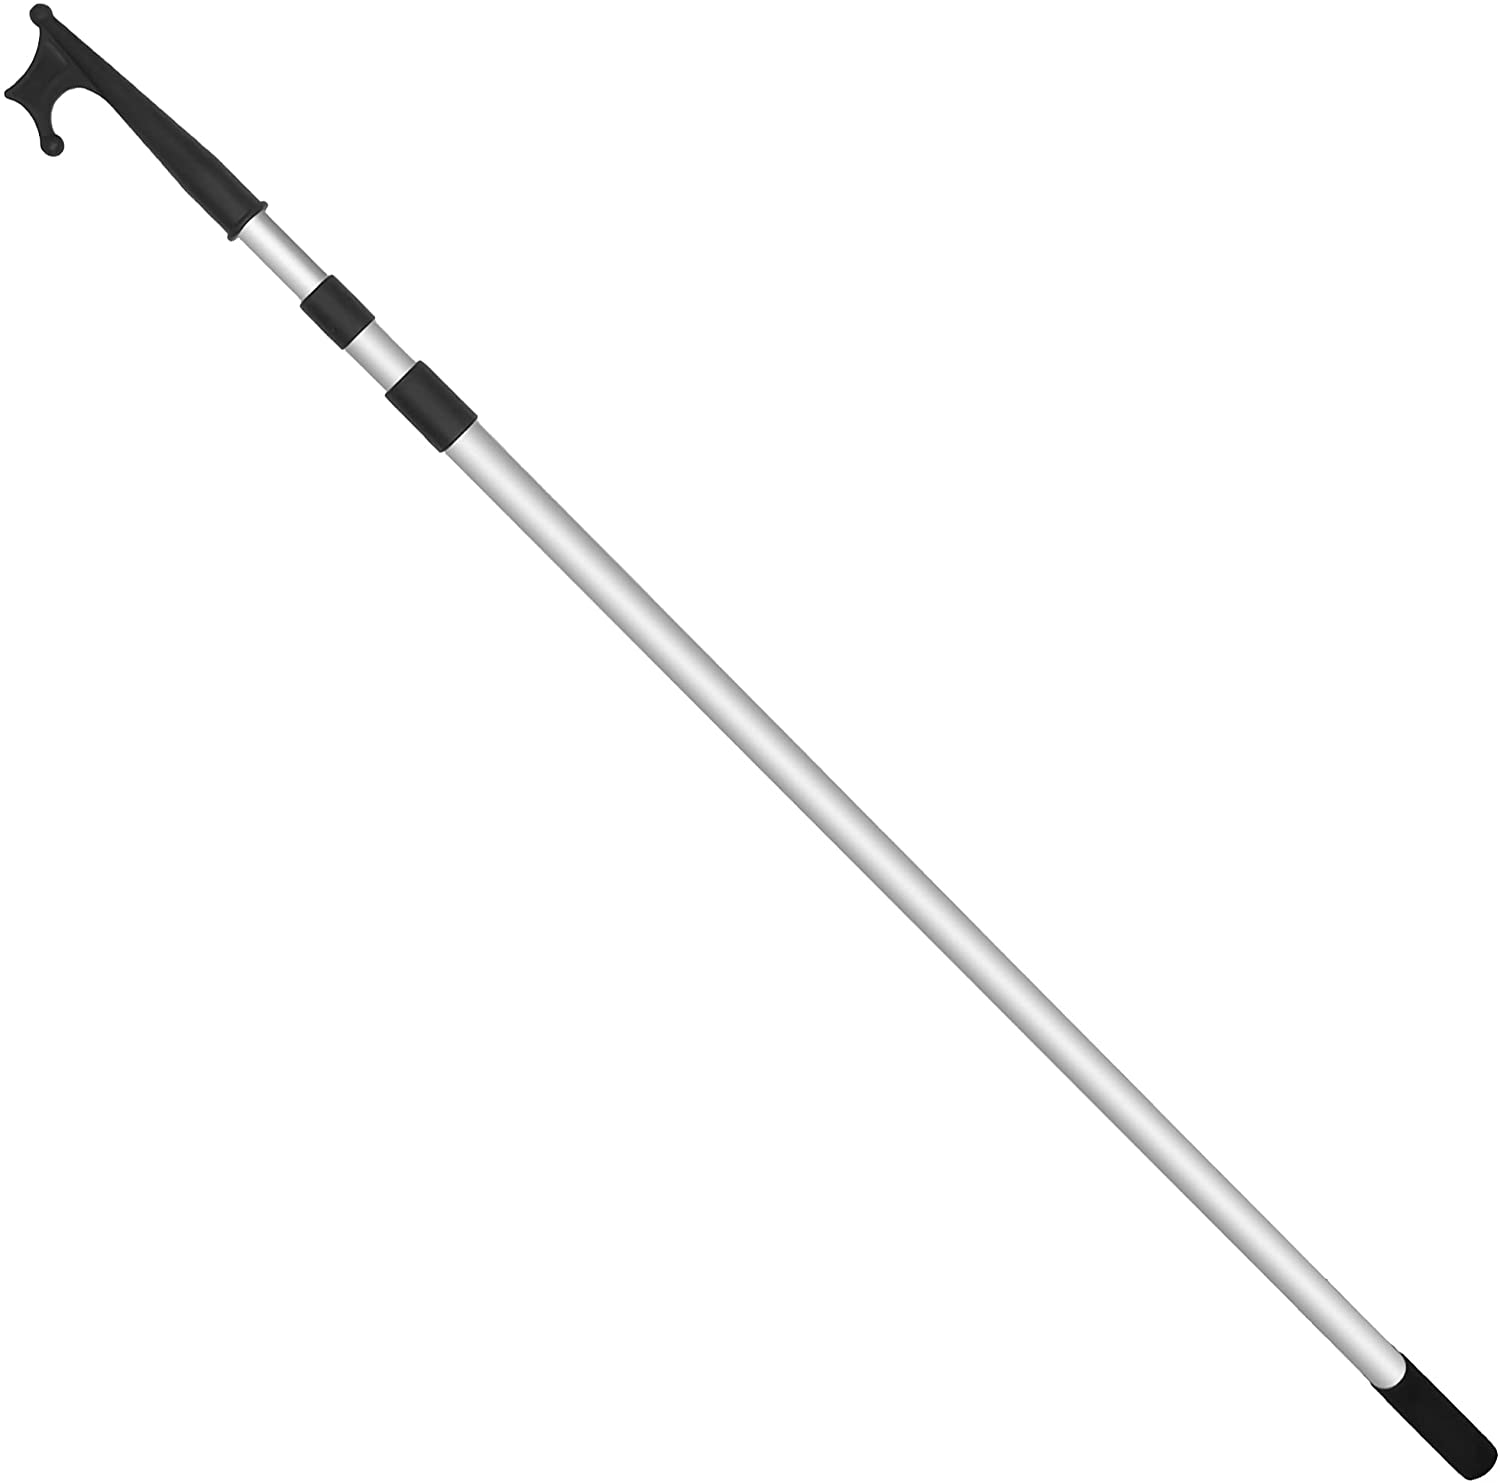 Telescoping Aluminum Boat Hook, Extends from 4-1/2 ft / 56 in